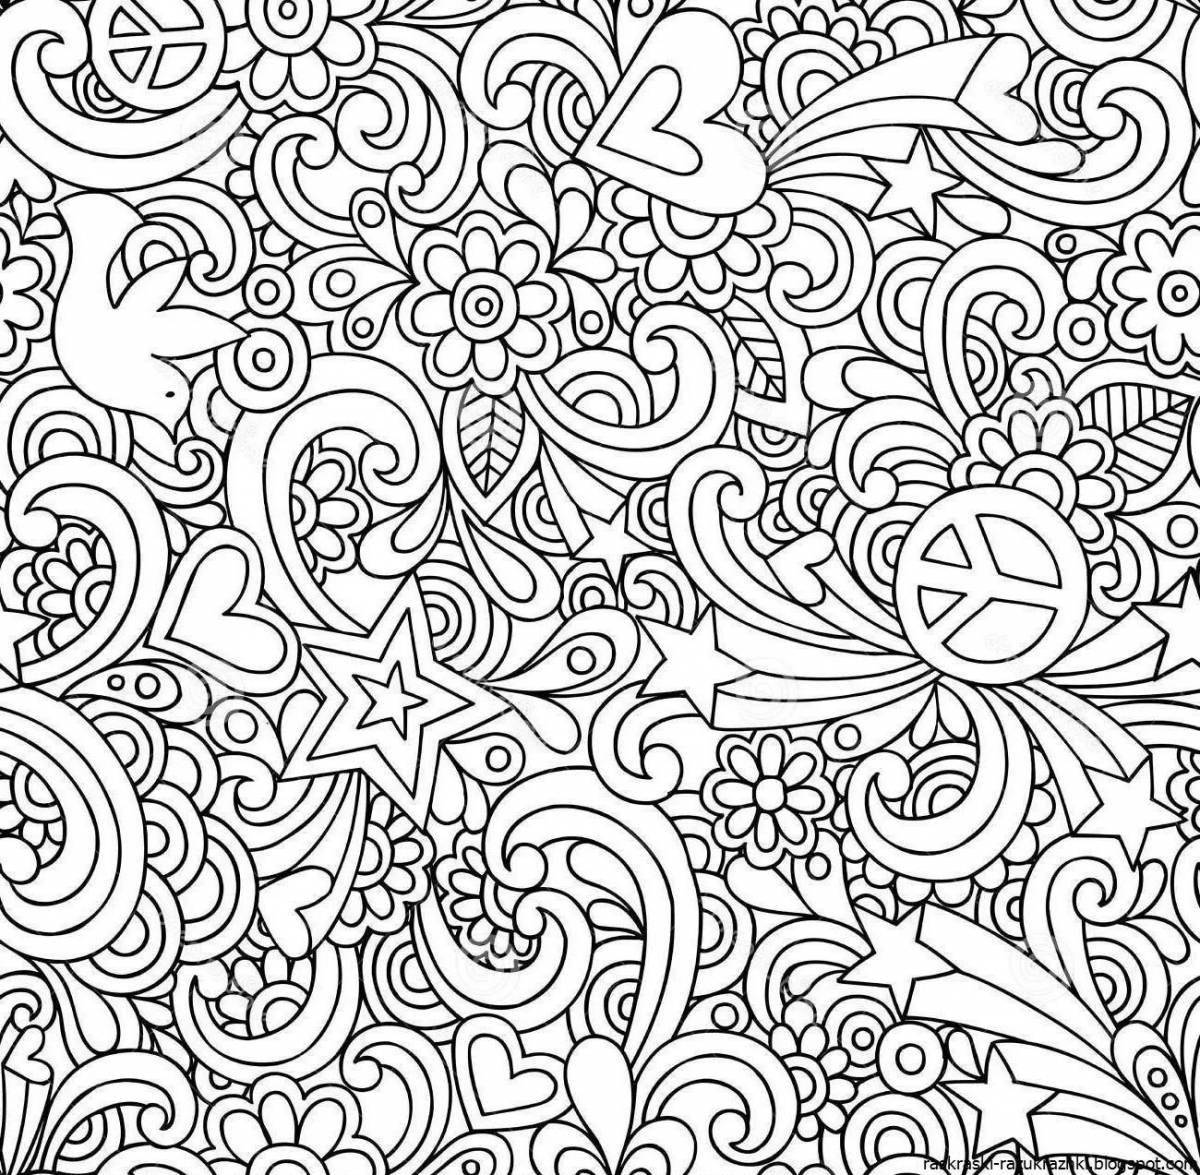 Bright coloring page background